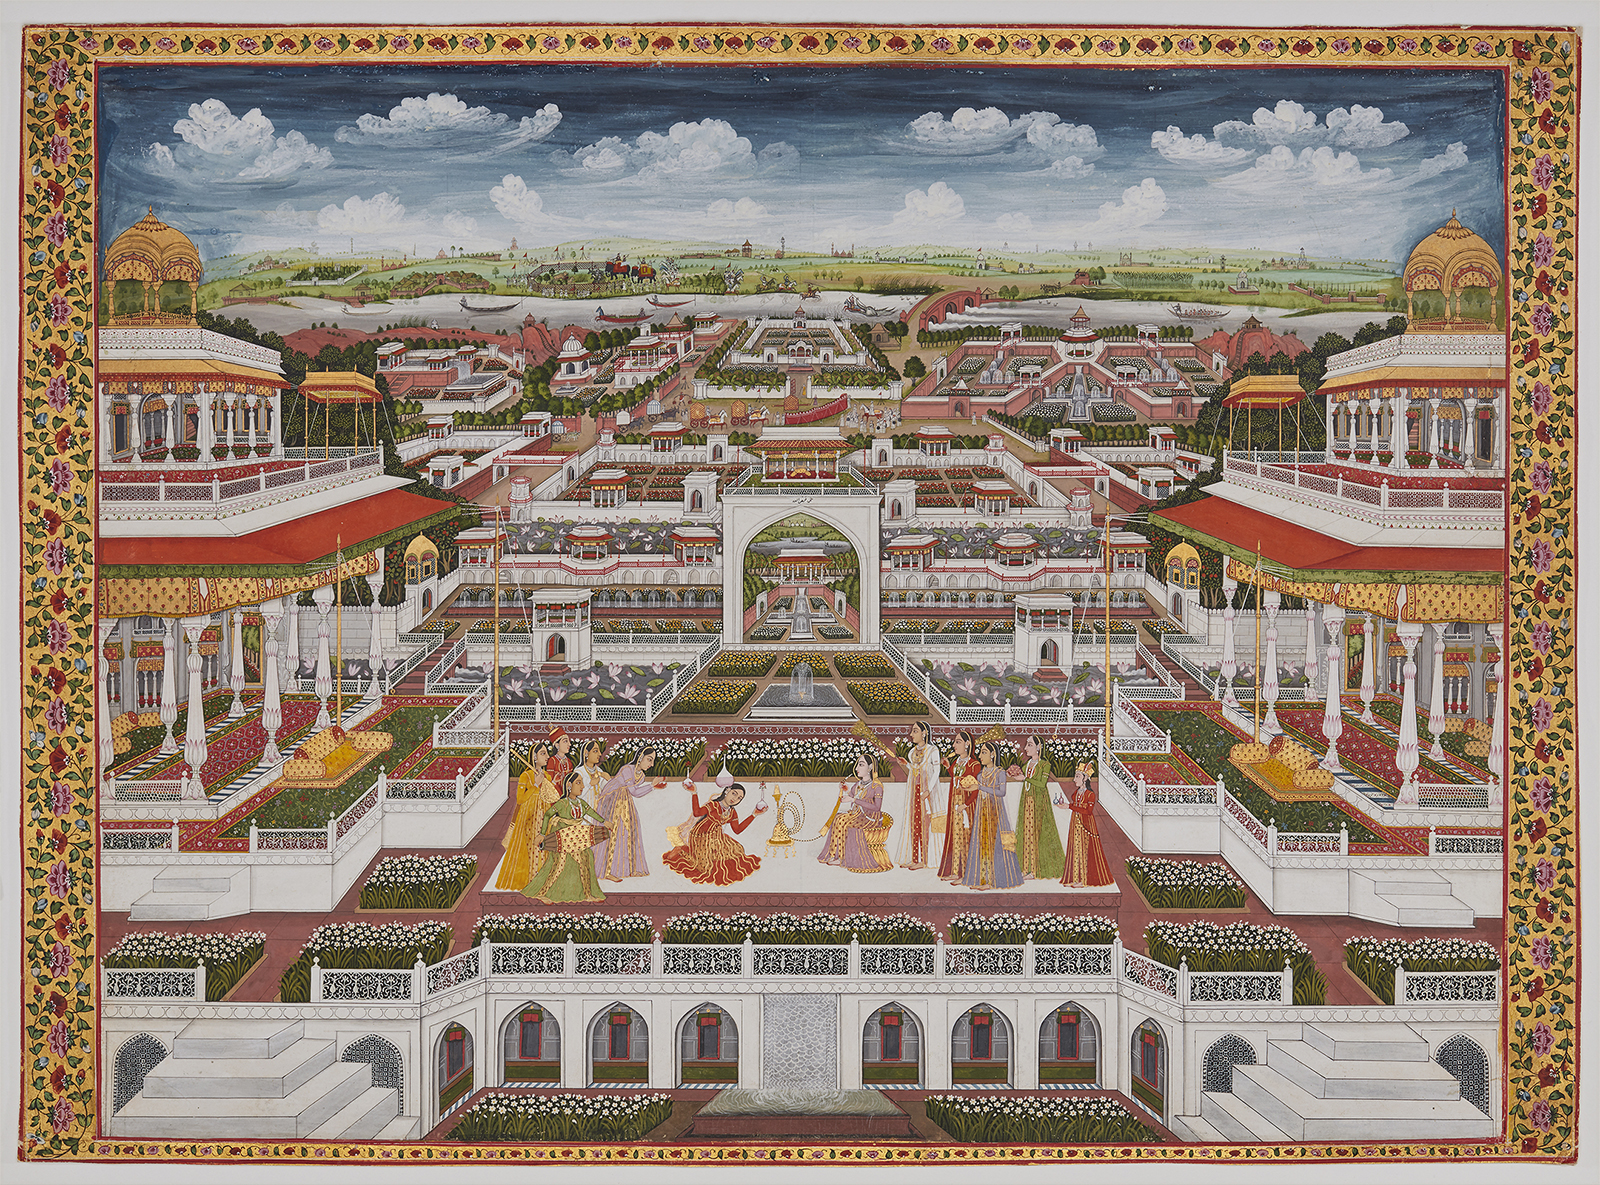 A manuscript painting from 18th-century India showing a group of women gathered in the courtyard of a palace watching a dancer balancing a flask on her head.